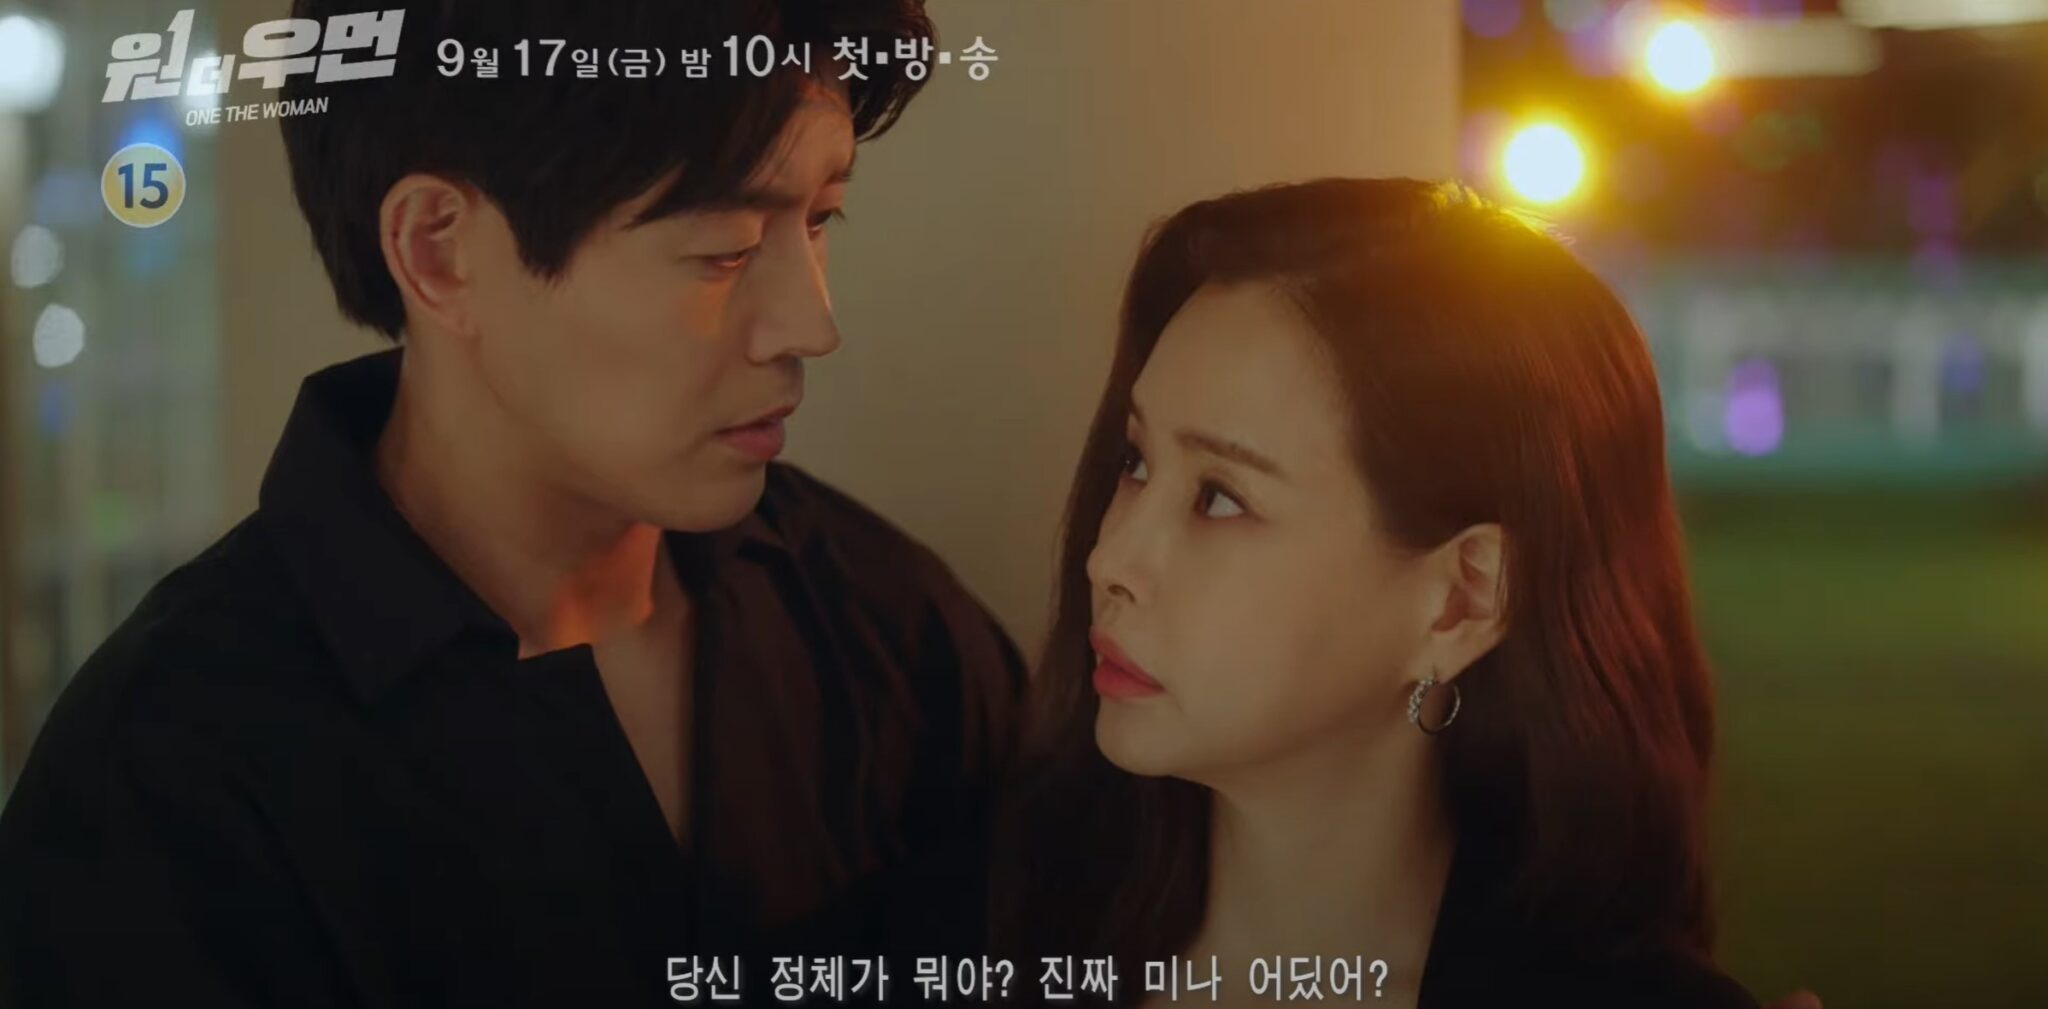 Honey Lee has an identity crisis in new teaser for One the Woman with Lee Sang-yoon